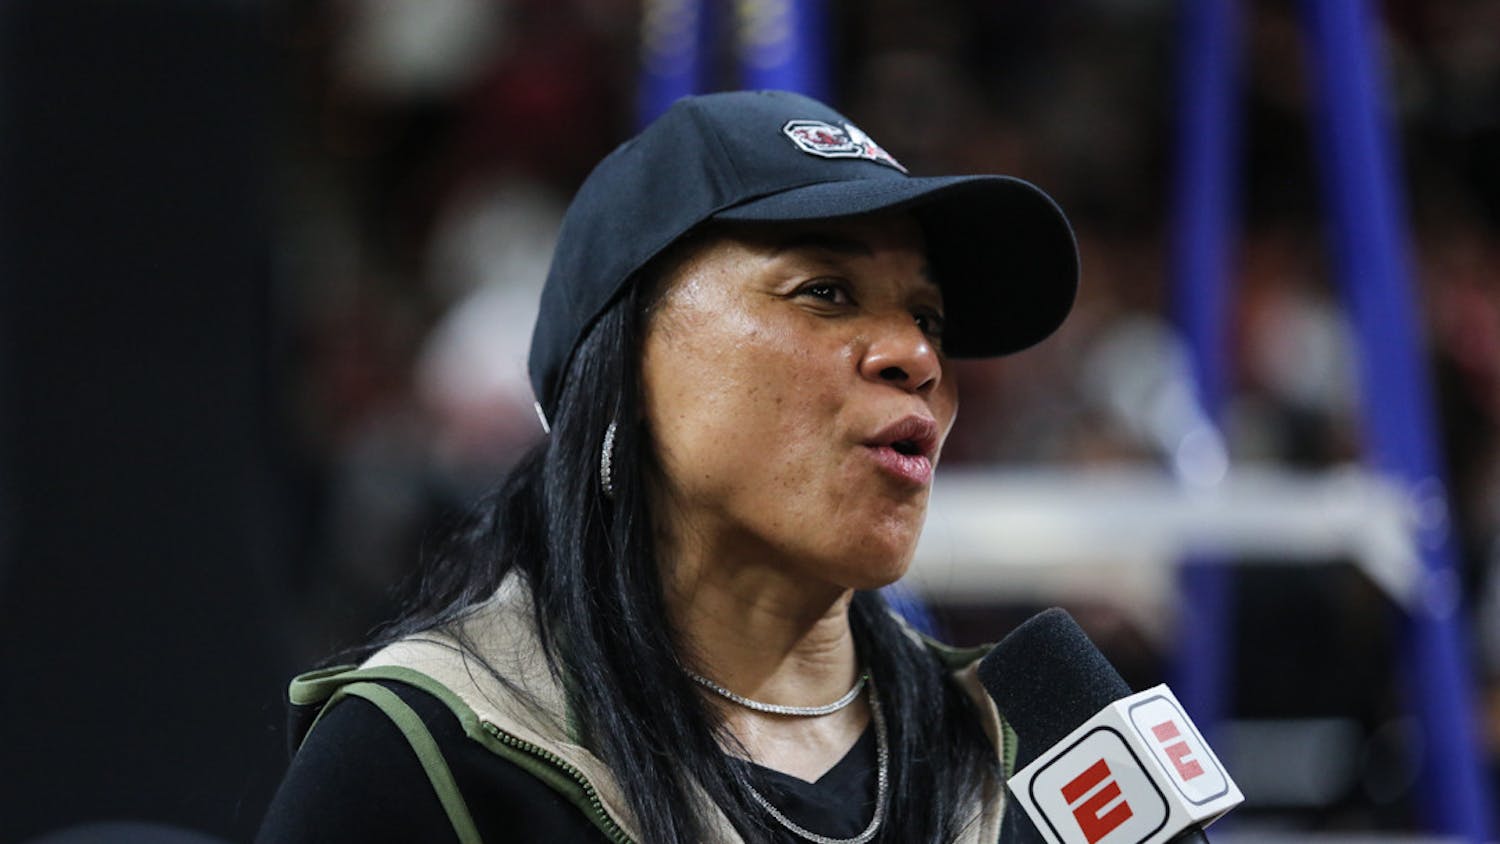 Gamecock women's head basketball coach Dawn Staley speaks with the press after winning the NCAA Regional Championship on March 27, 2023. The Gamecocks defeated the Terrapins 86-75.